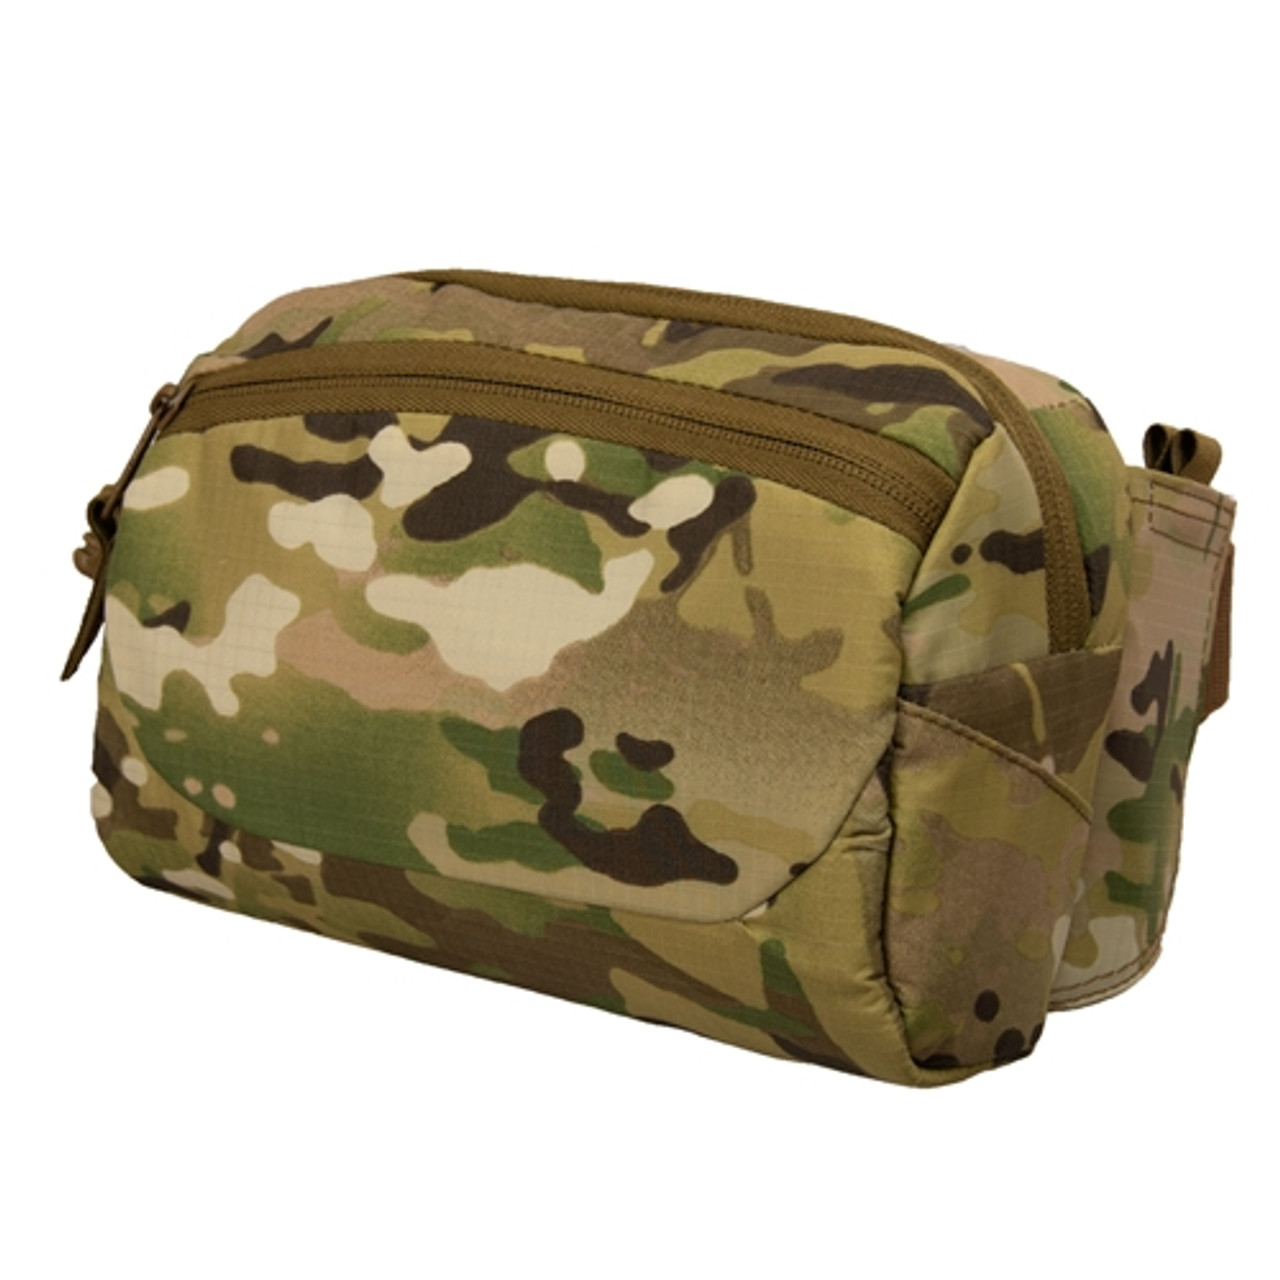 MultiCam OCP Conceal Carry Waist Pack | MIlitary Luggage